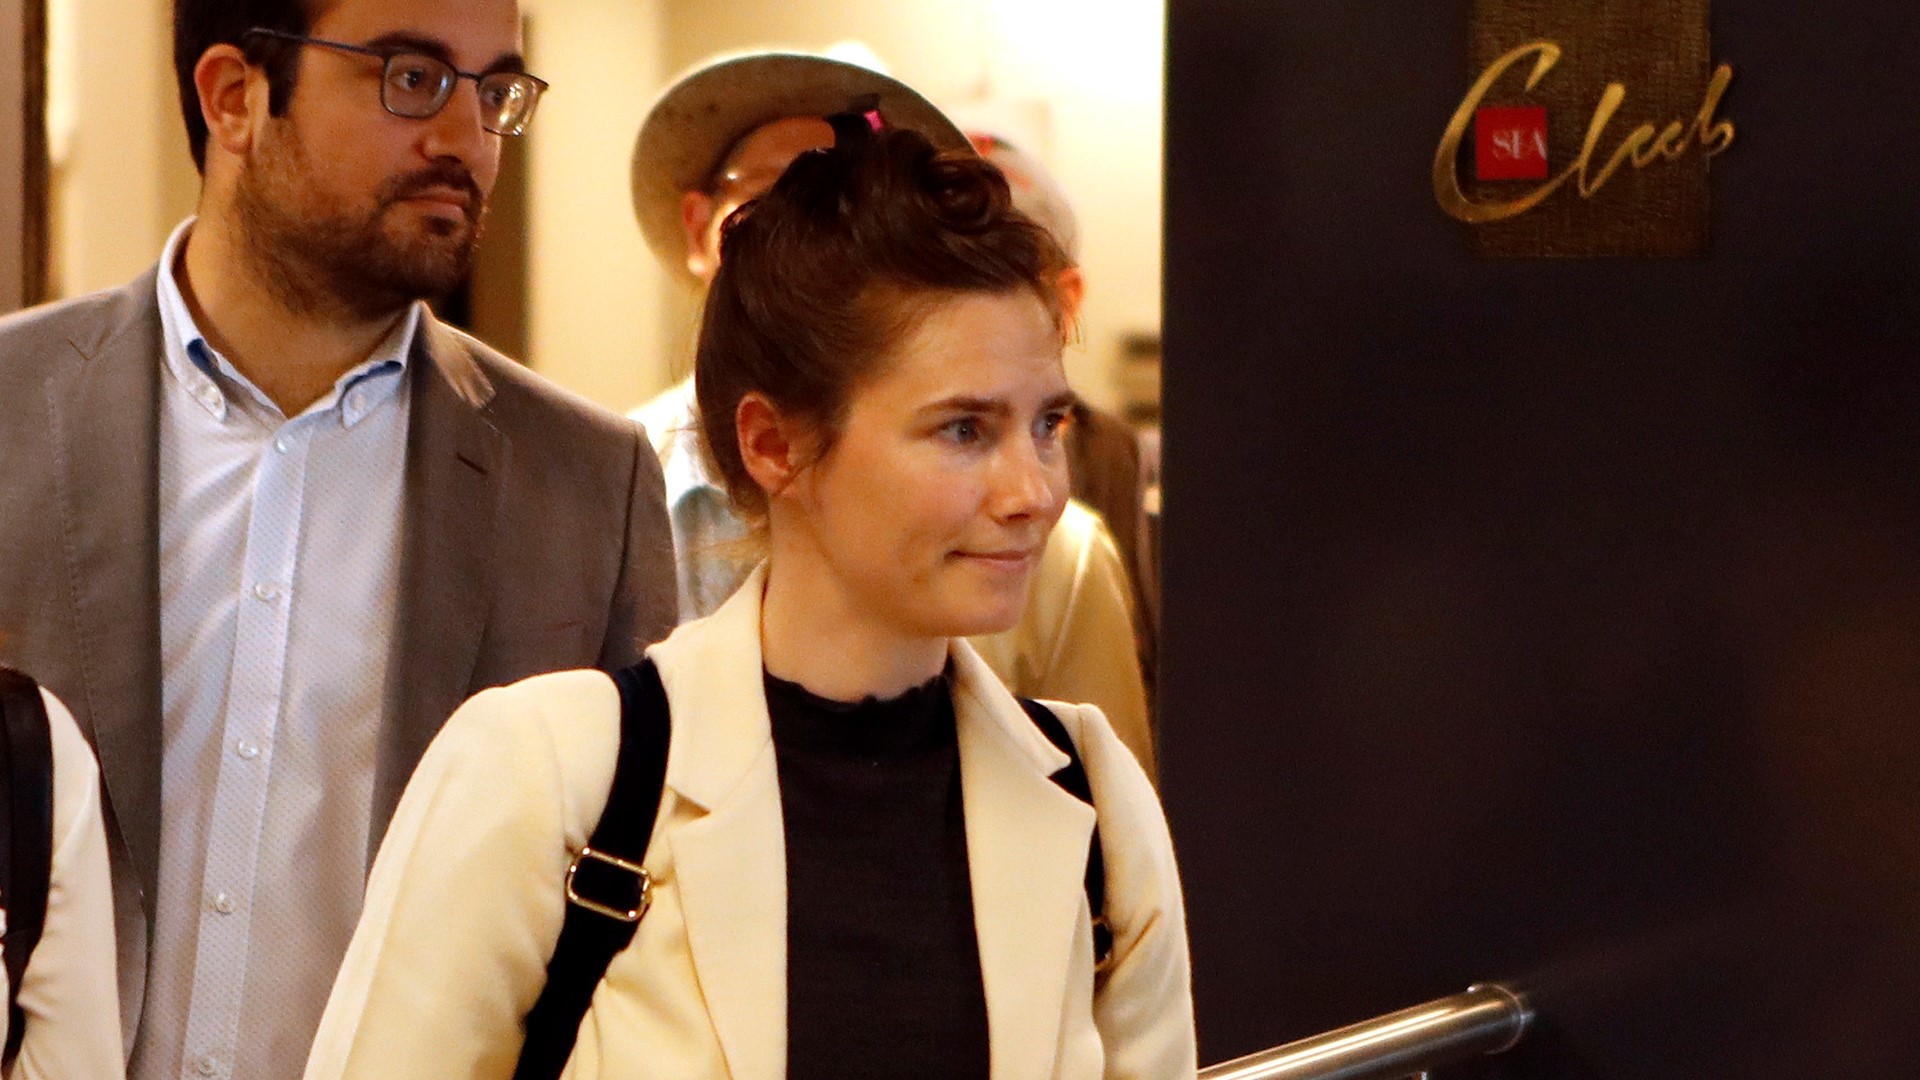 American Amanda Knox arrived in Italy on Thursday for the first time since she was acquitted in the murder of her British roommate. (AP)